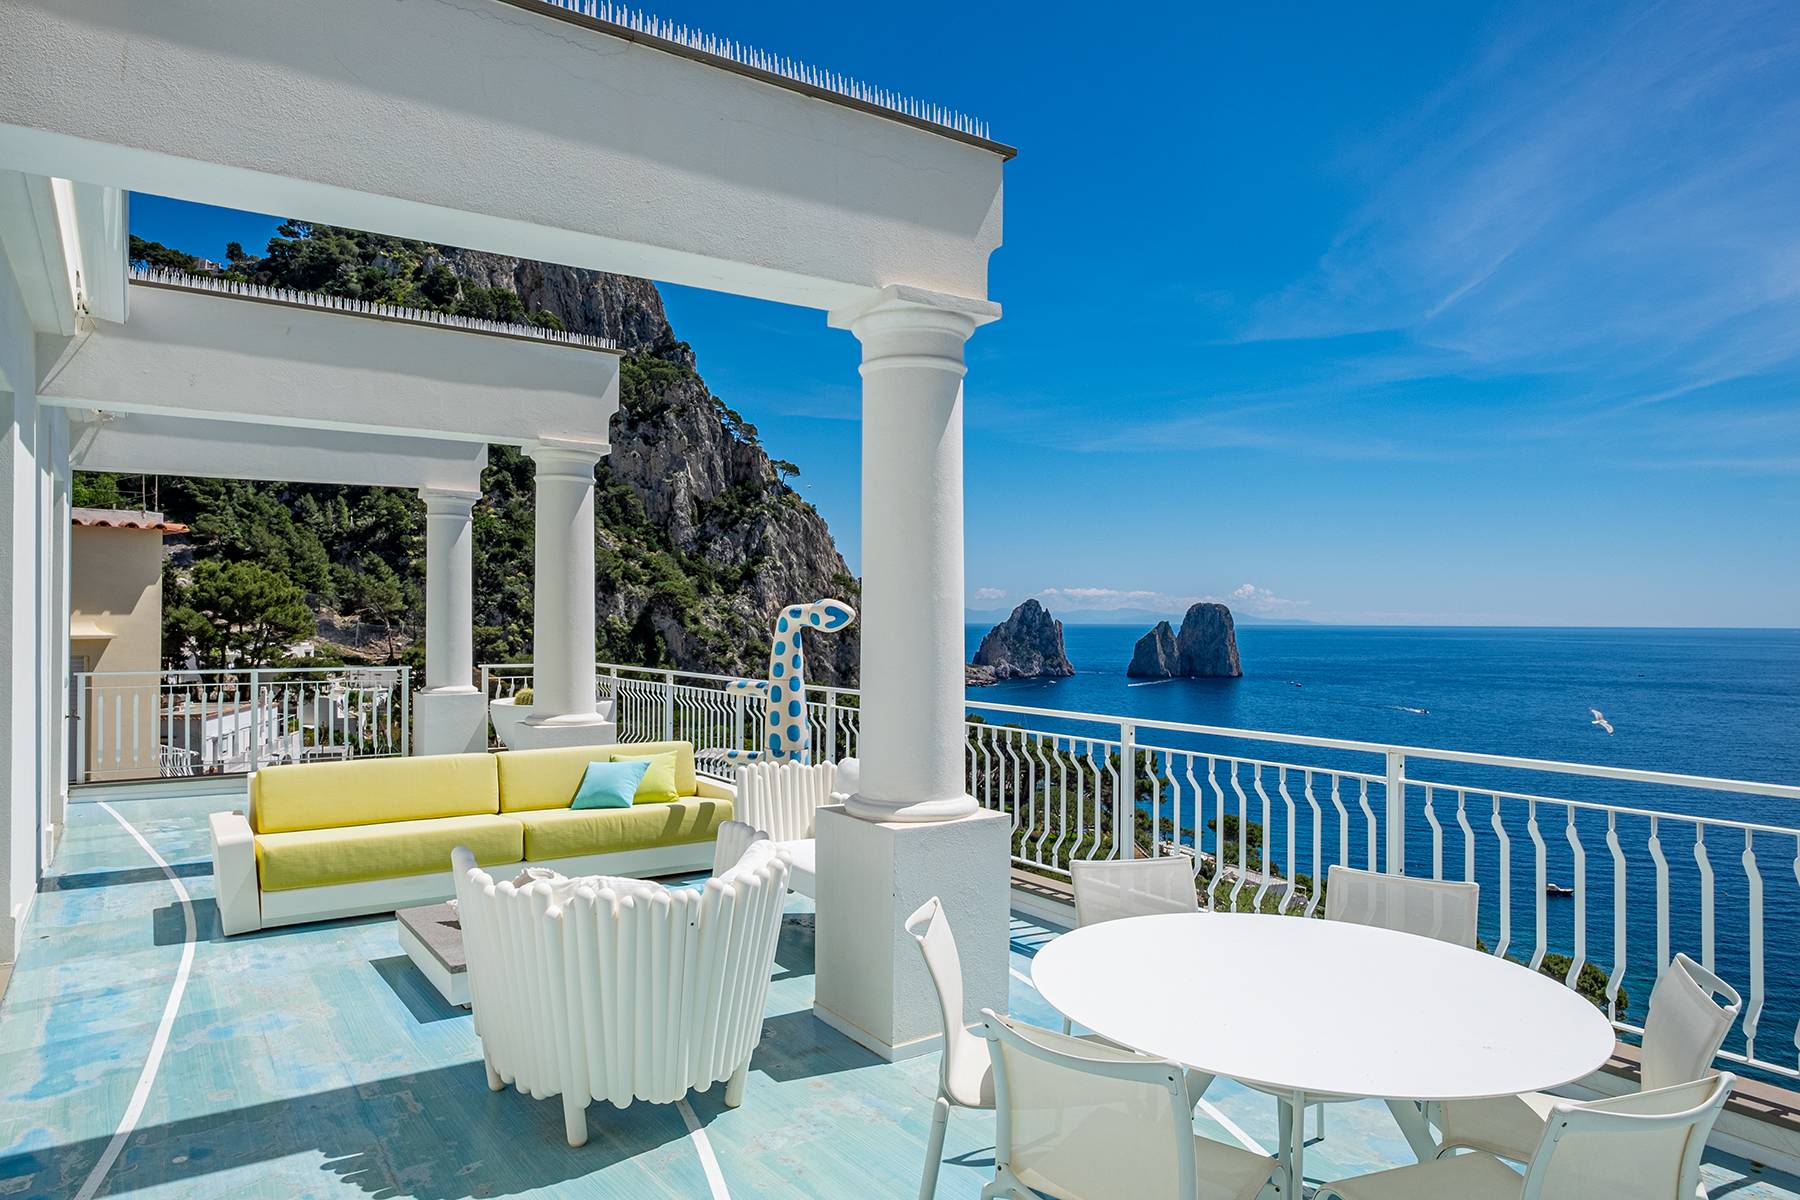 Penthouse with a breath taking view on the Faraglioni Rocks